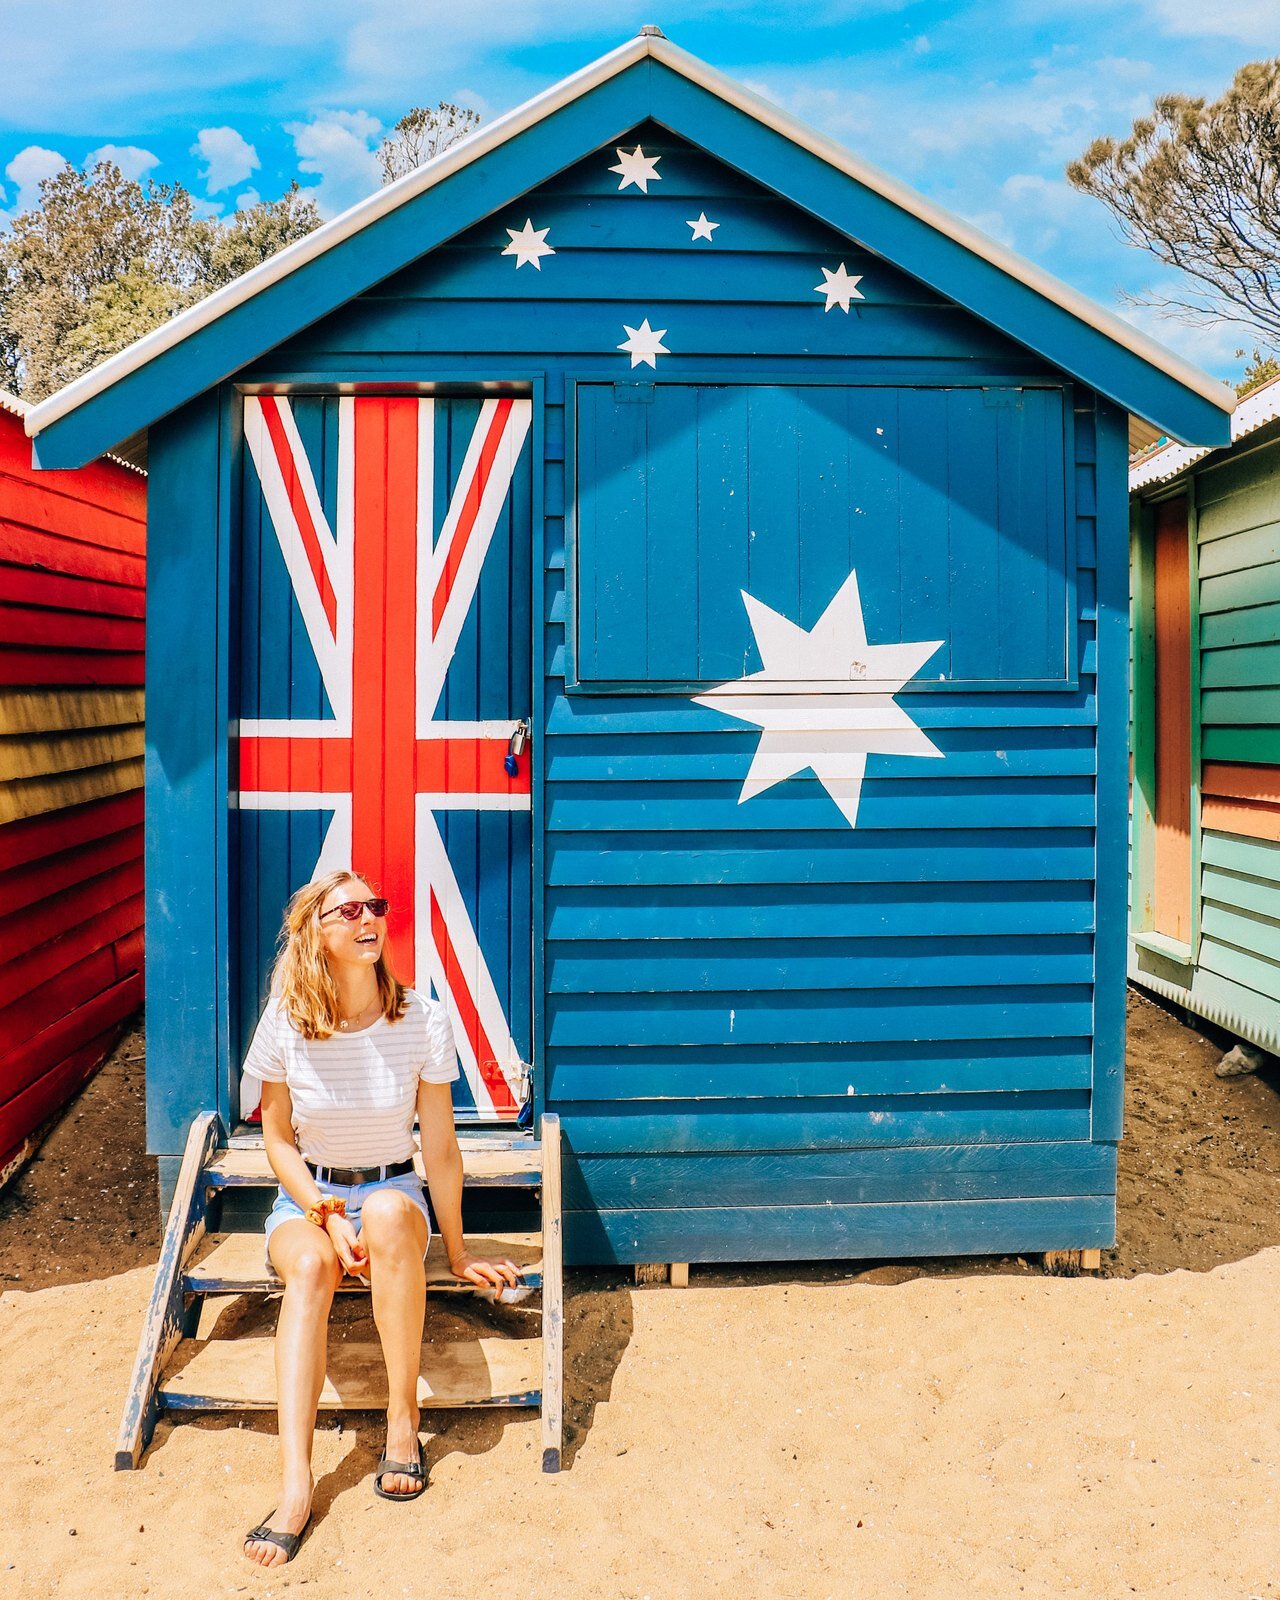 Agirl sitting on the steps of a blue beach hut with the Australian flag on it atBrighton Beach huts in Melbourne, Australia